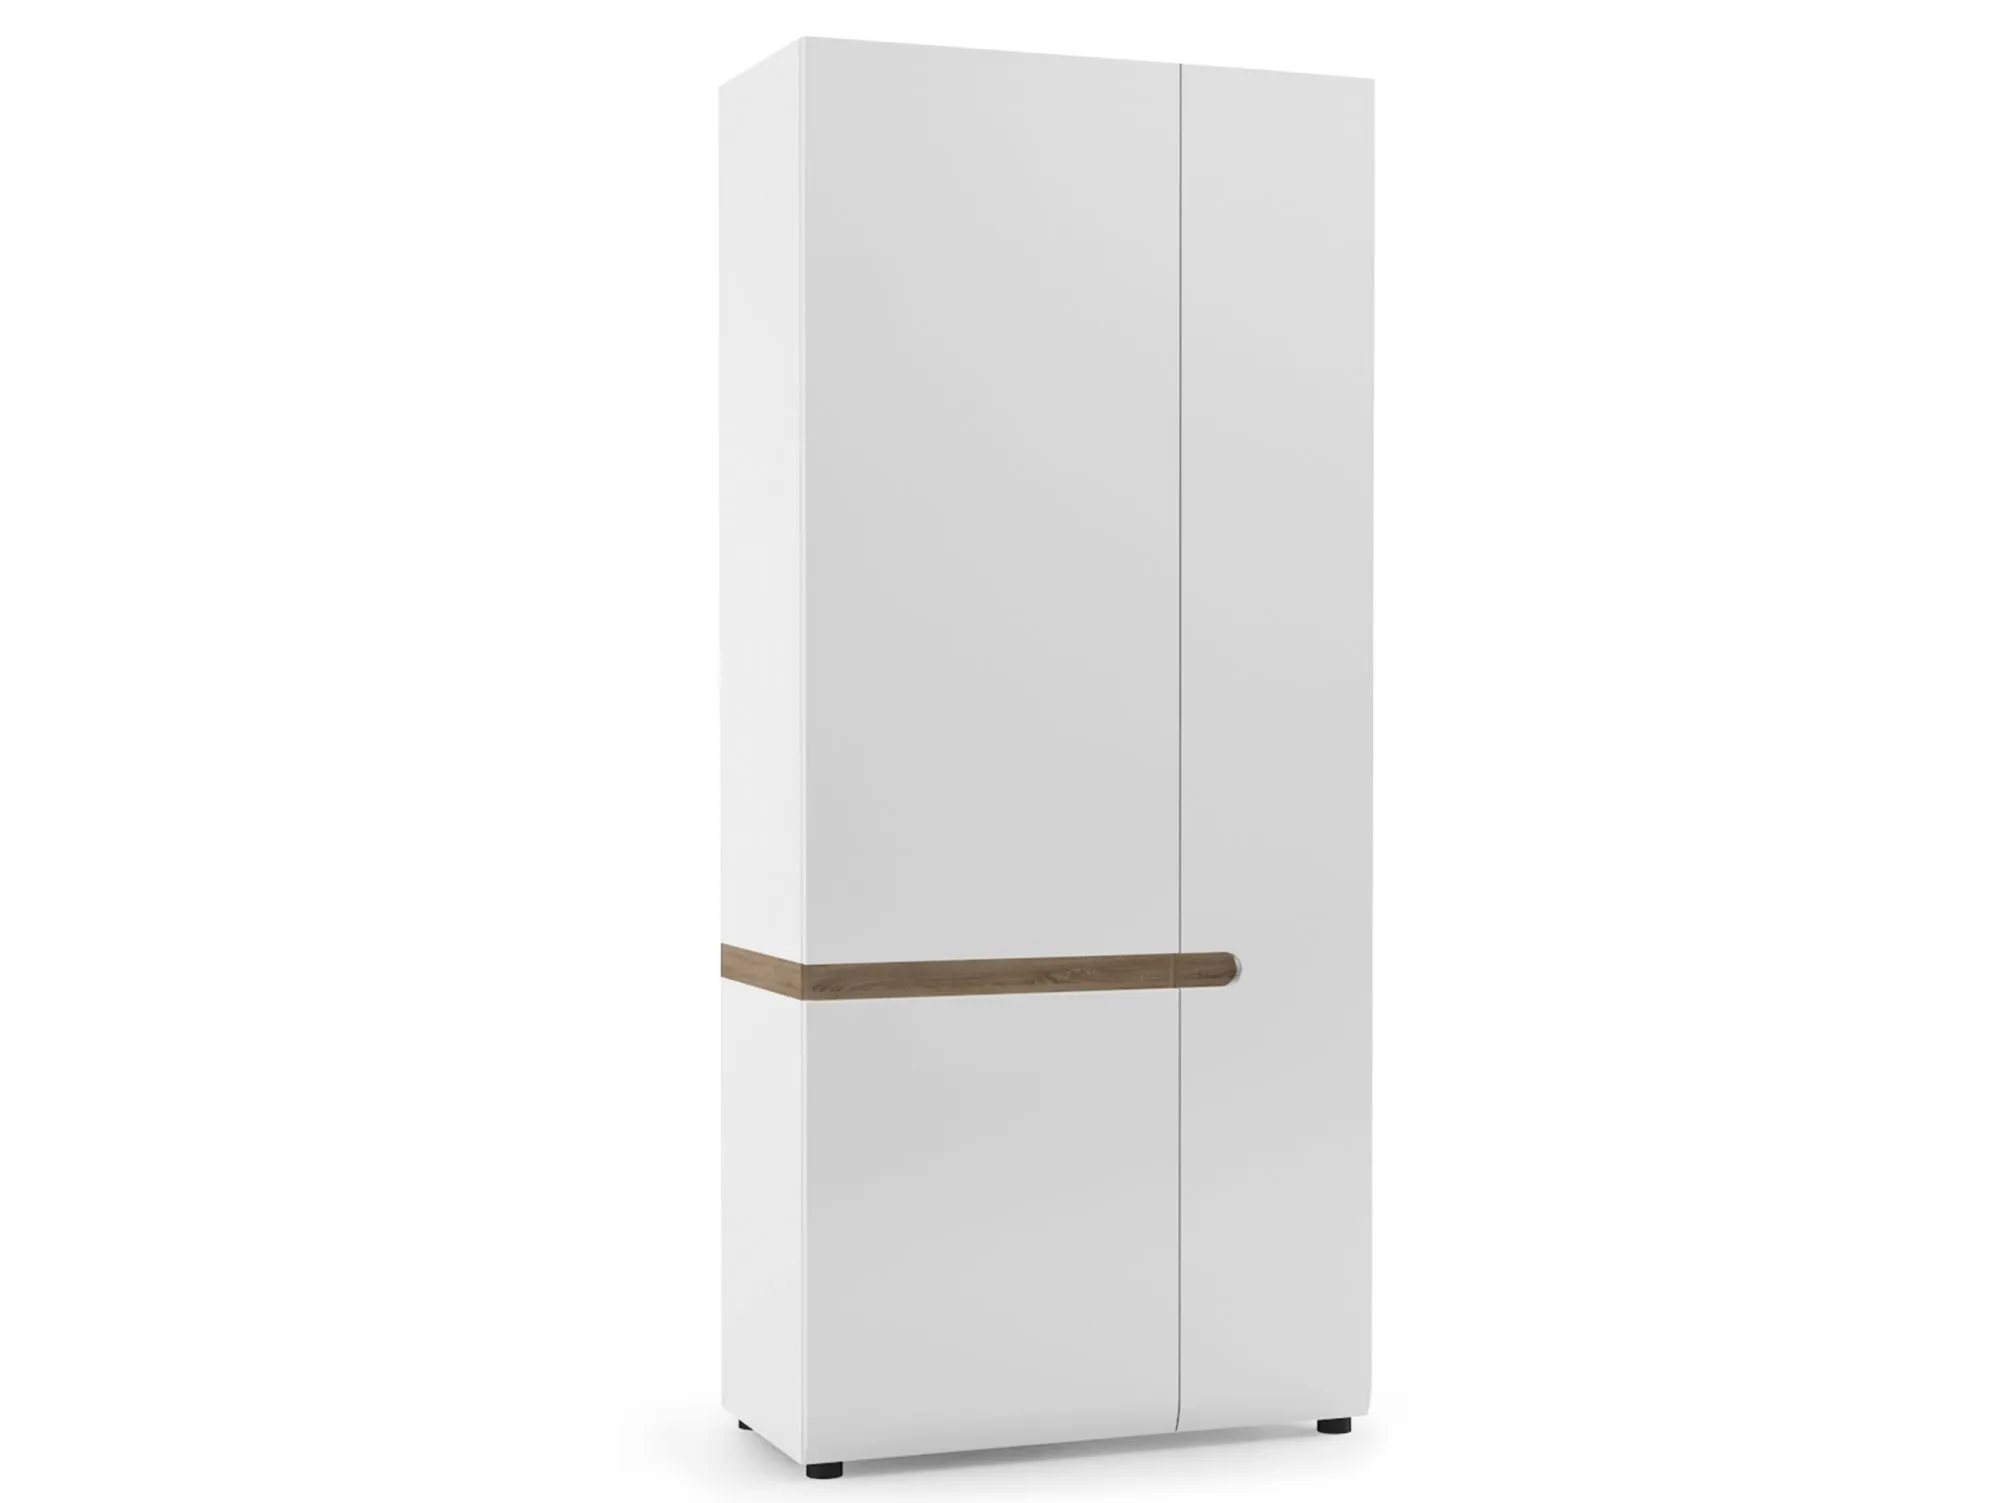 Furniture To Go Furniture To Go Chelsea White High Gloss and Oak 2 Door Double Wardrobe